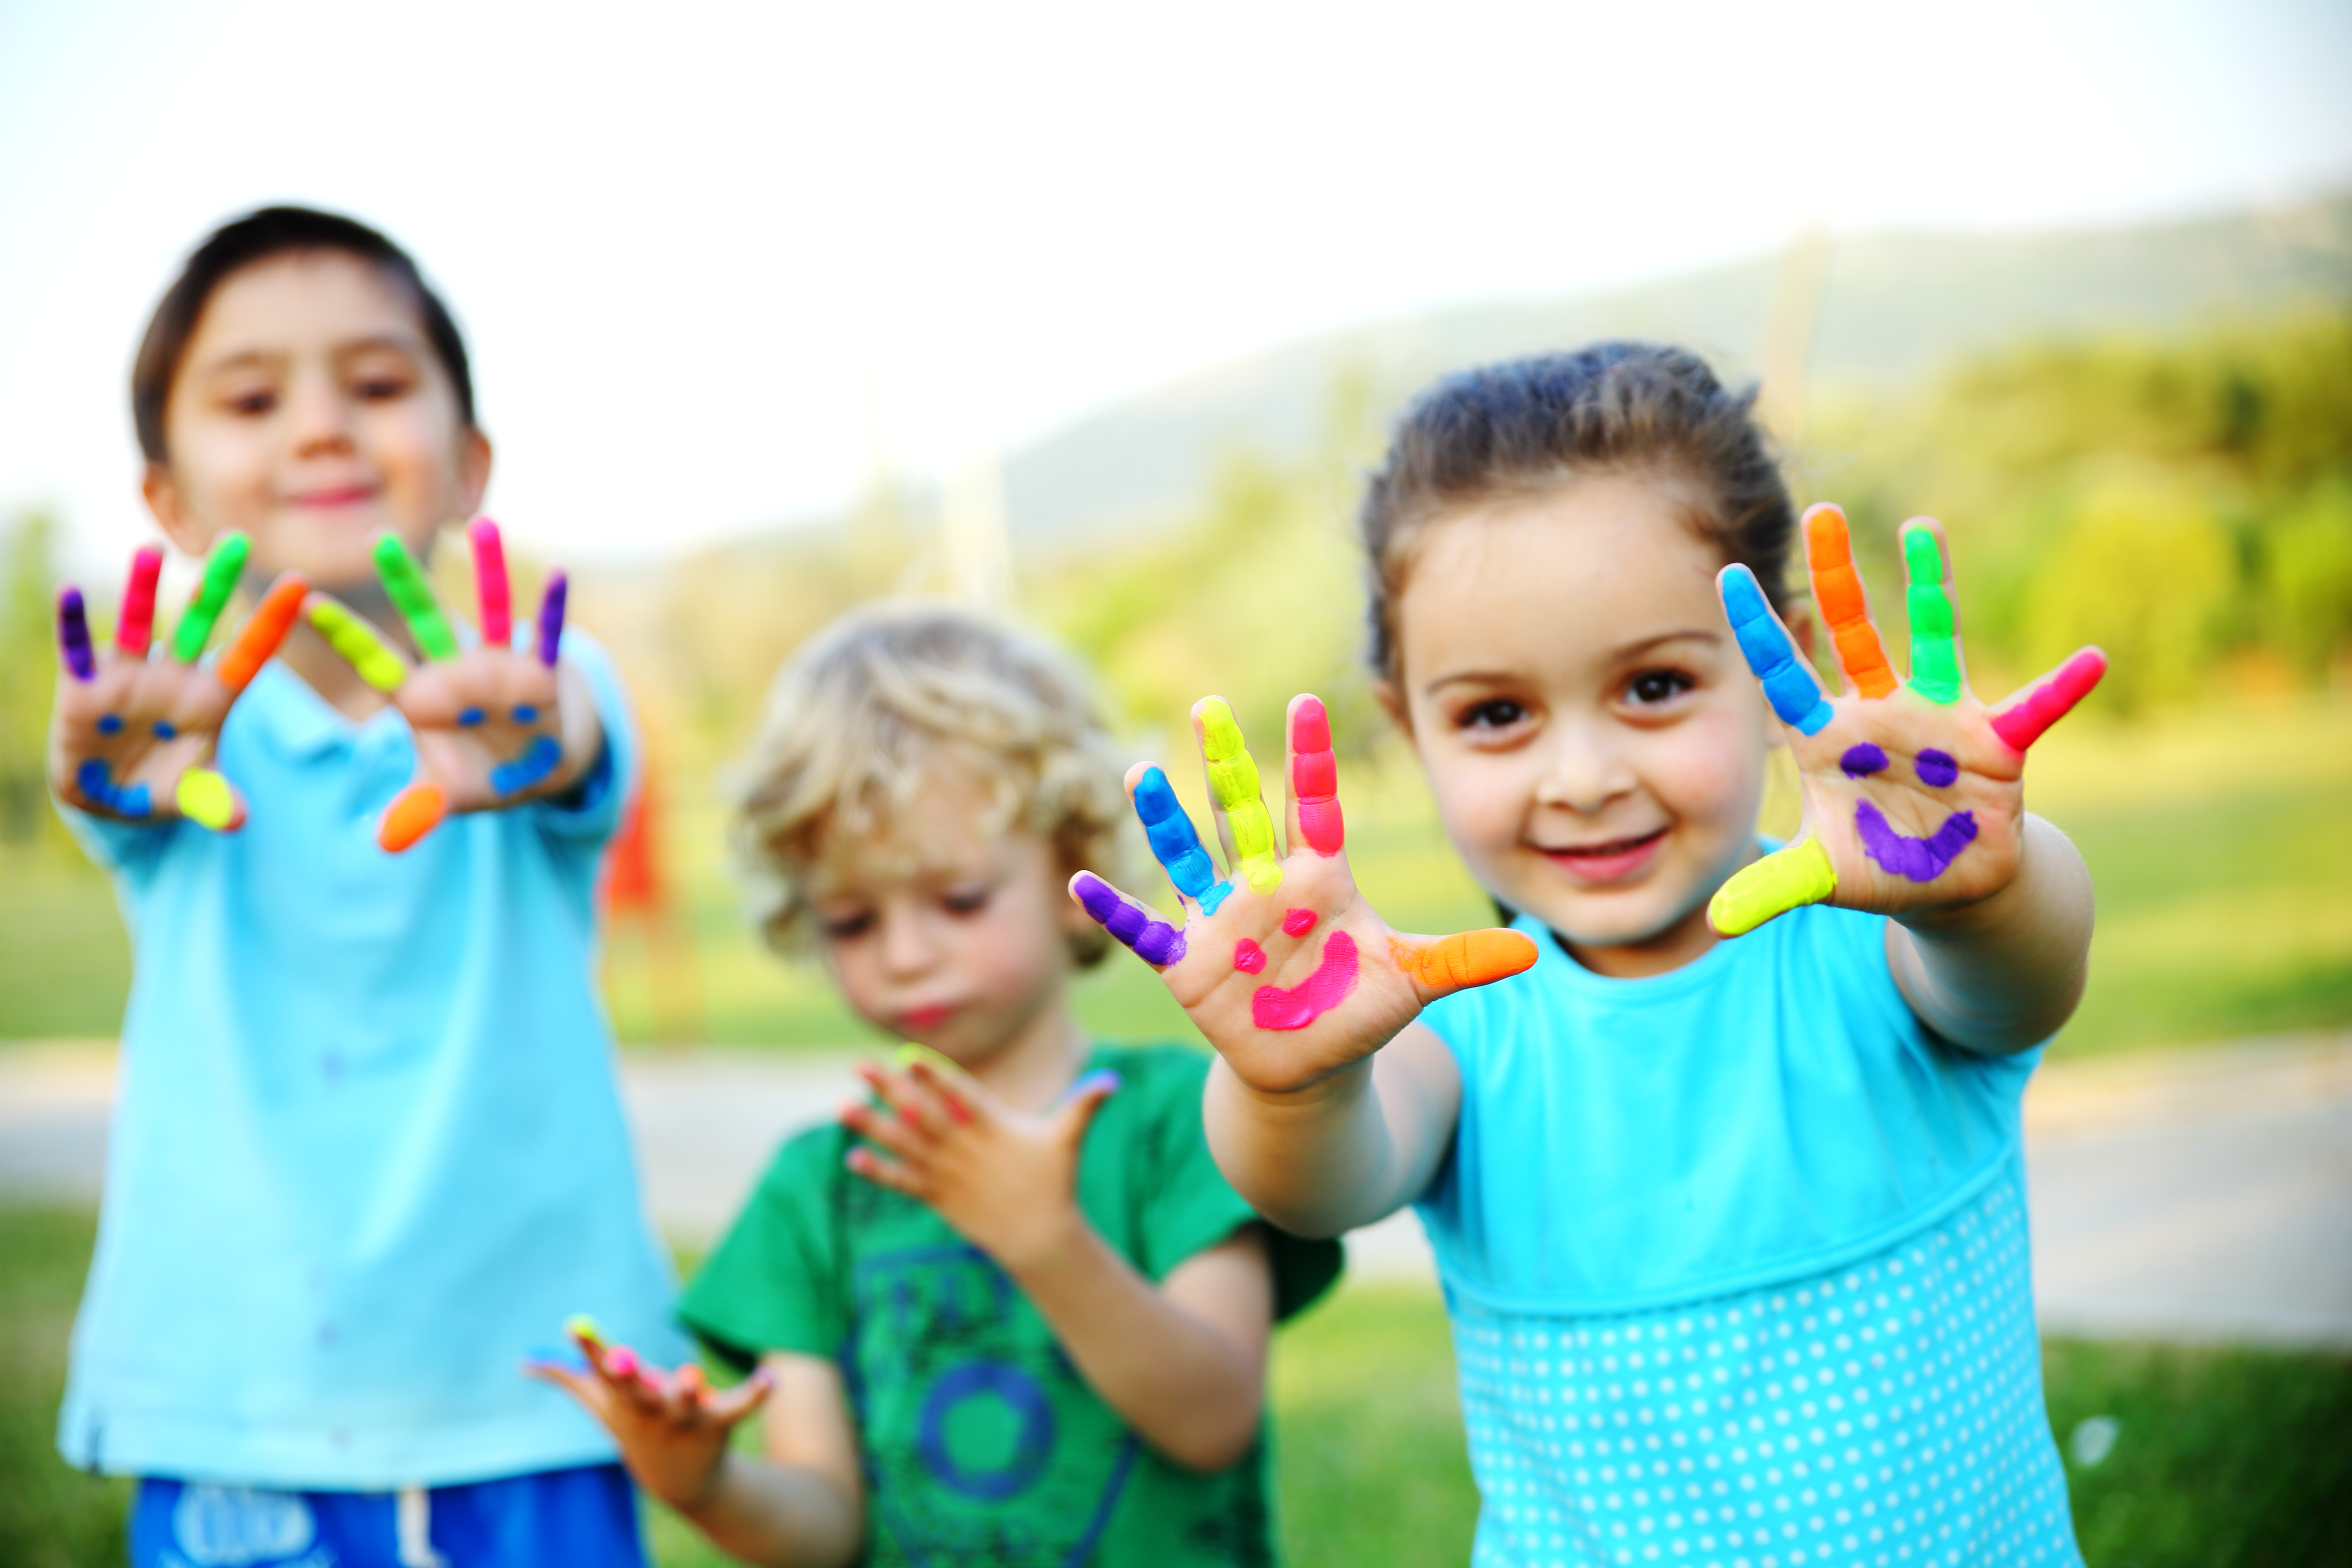 Image of preschoolers with painted hands